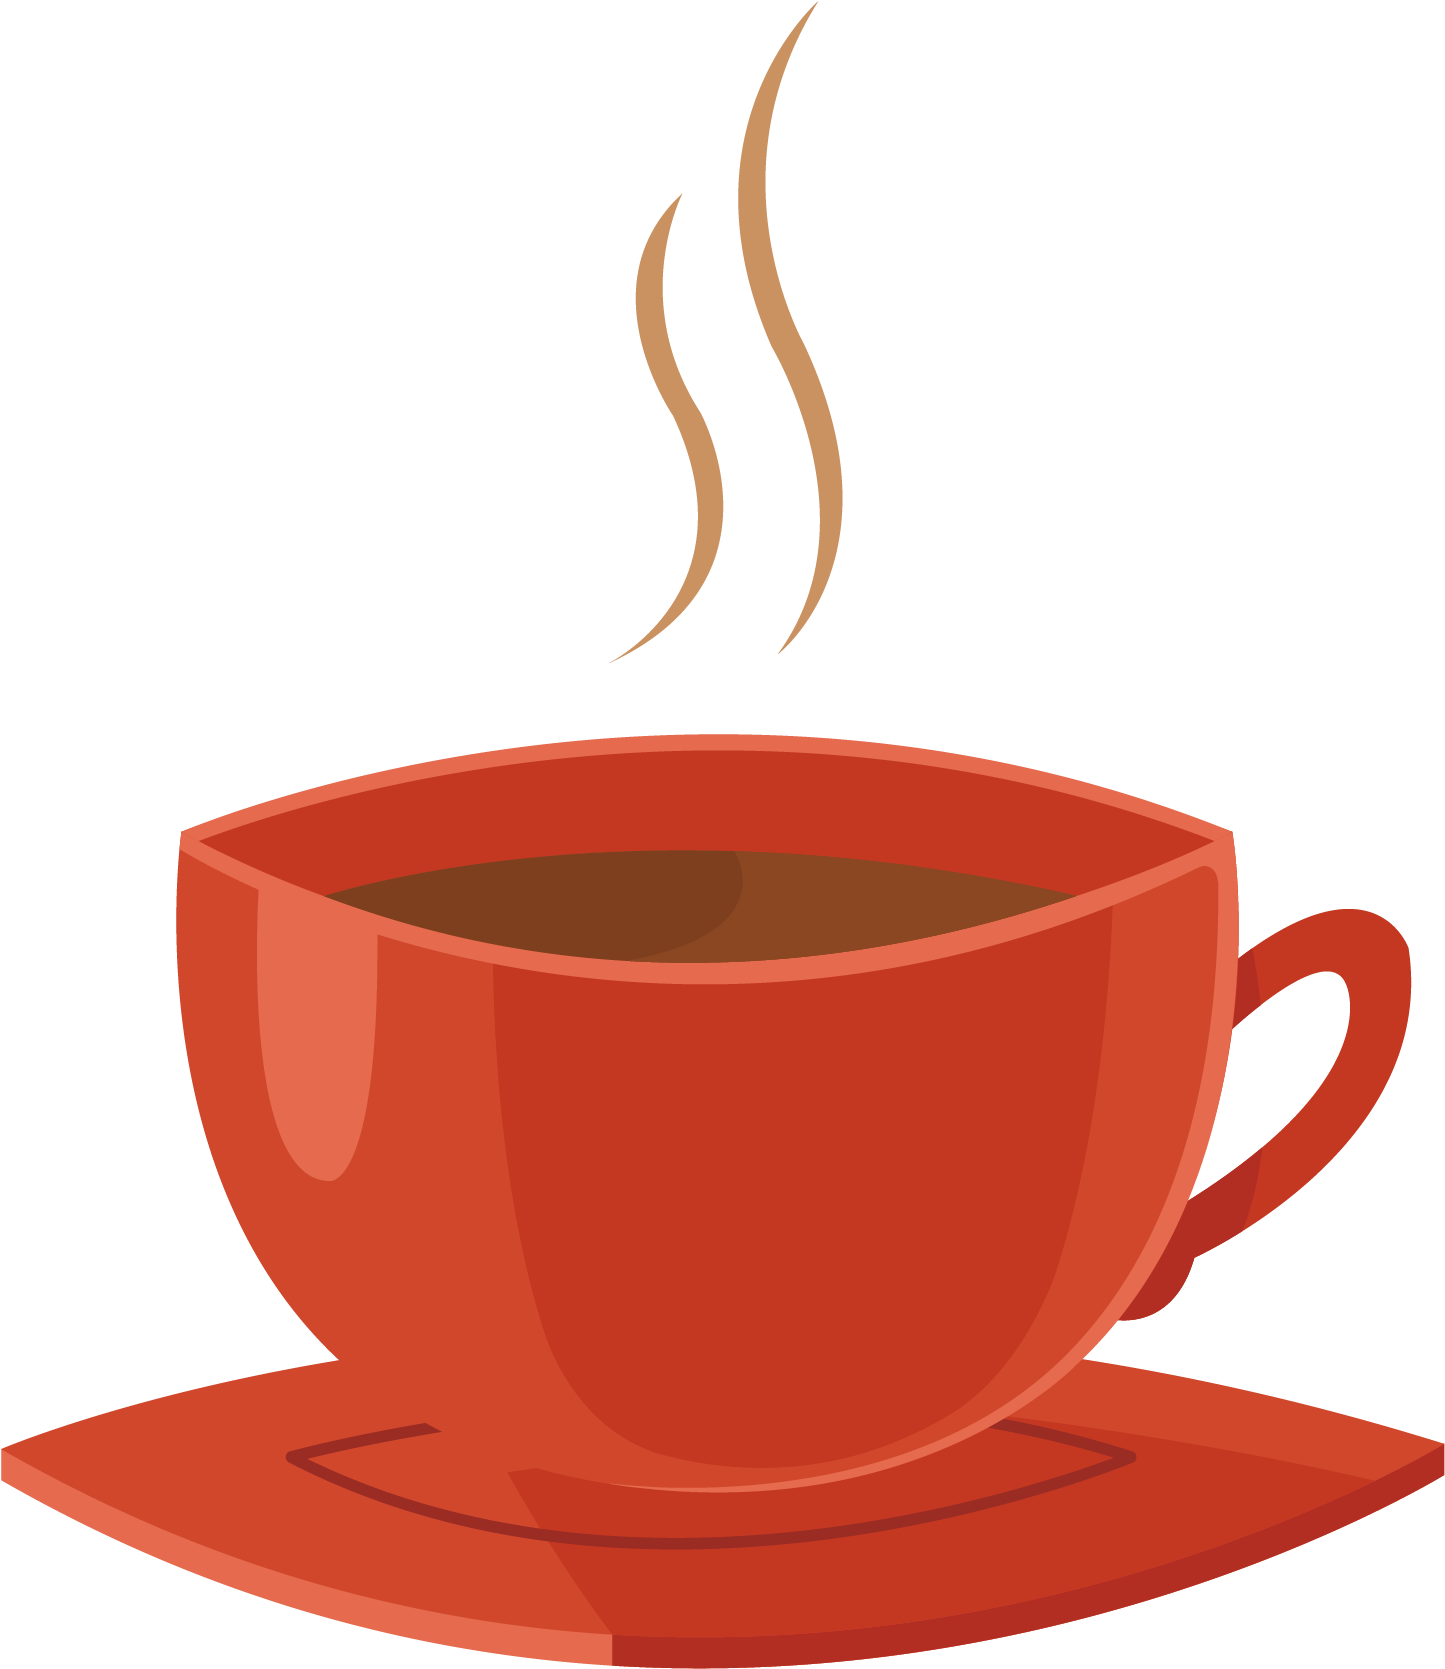 Steaming Red Coffee Cup Vector PNG